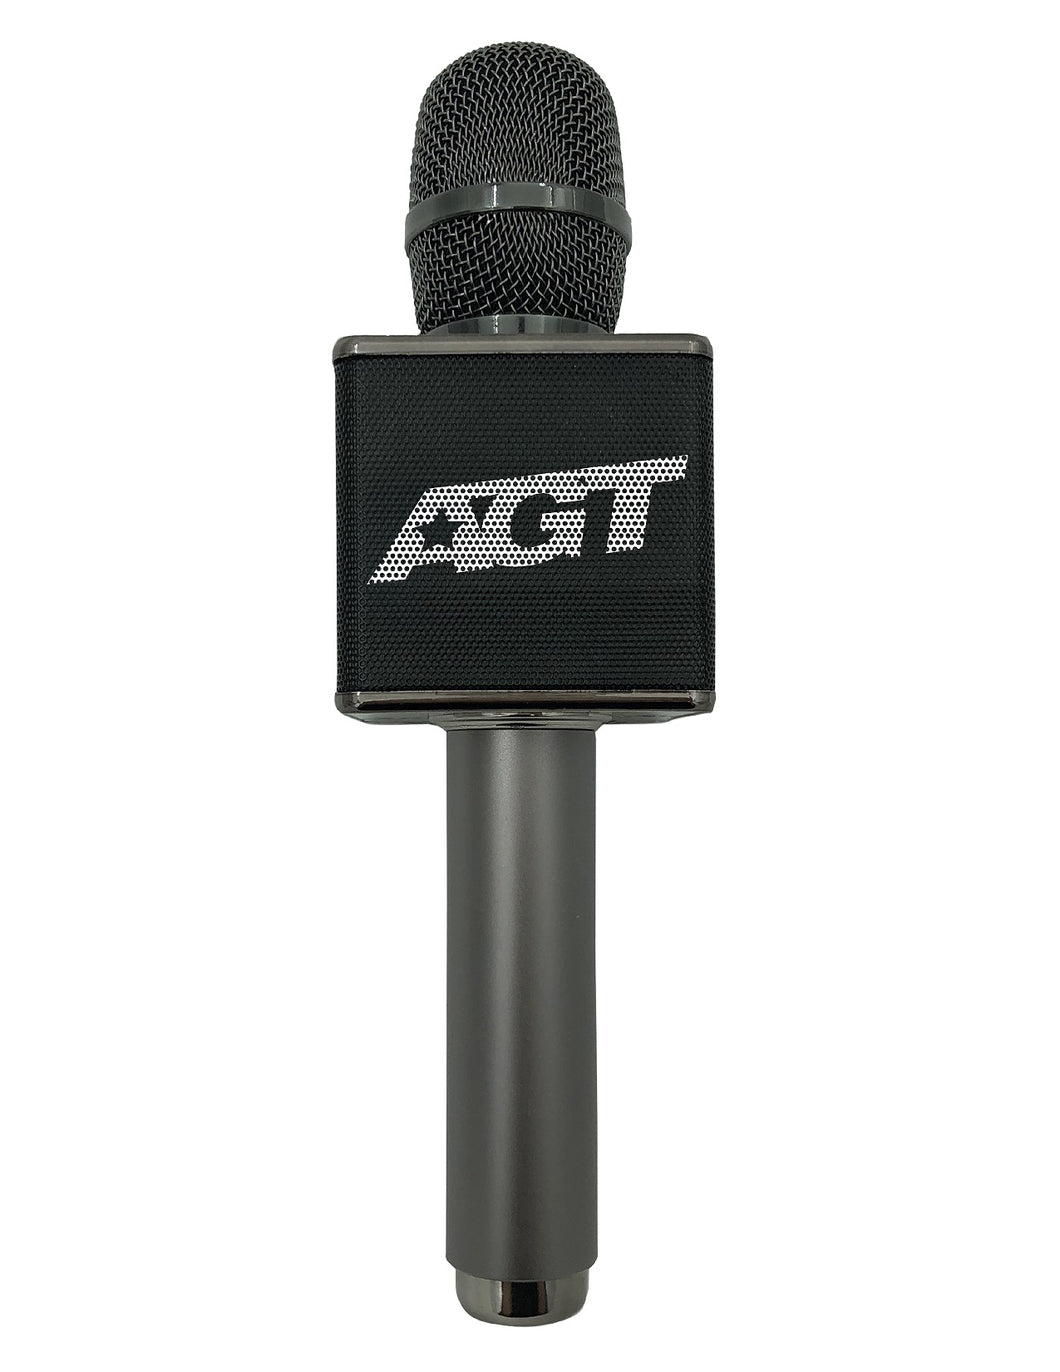 America's Got Talent Voice Changing Microphone